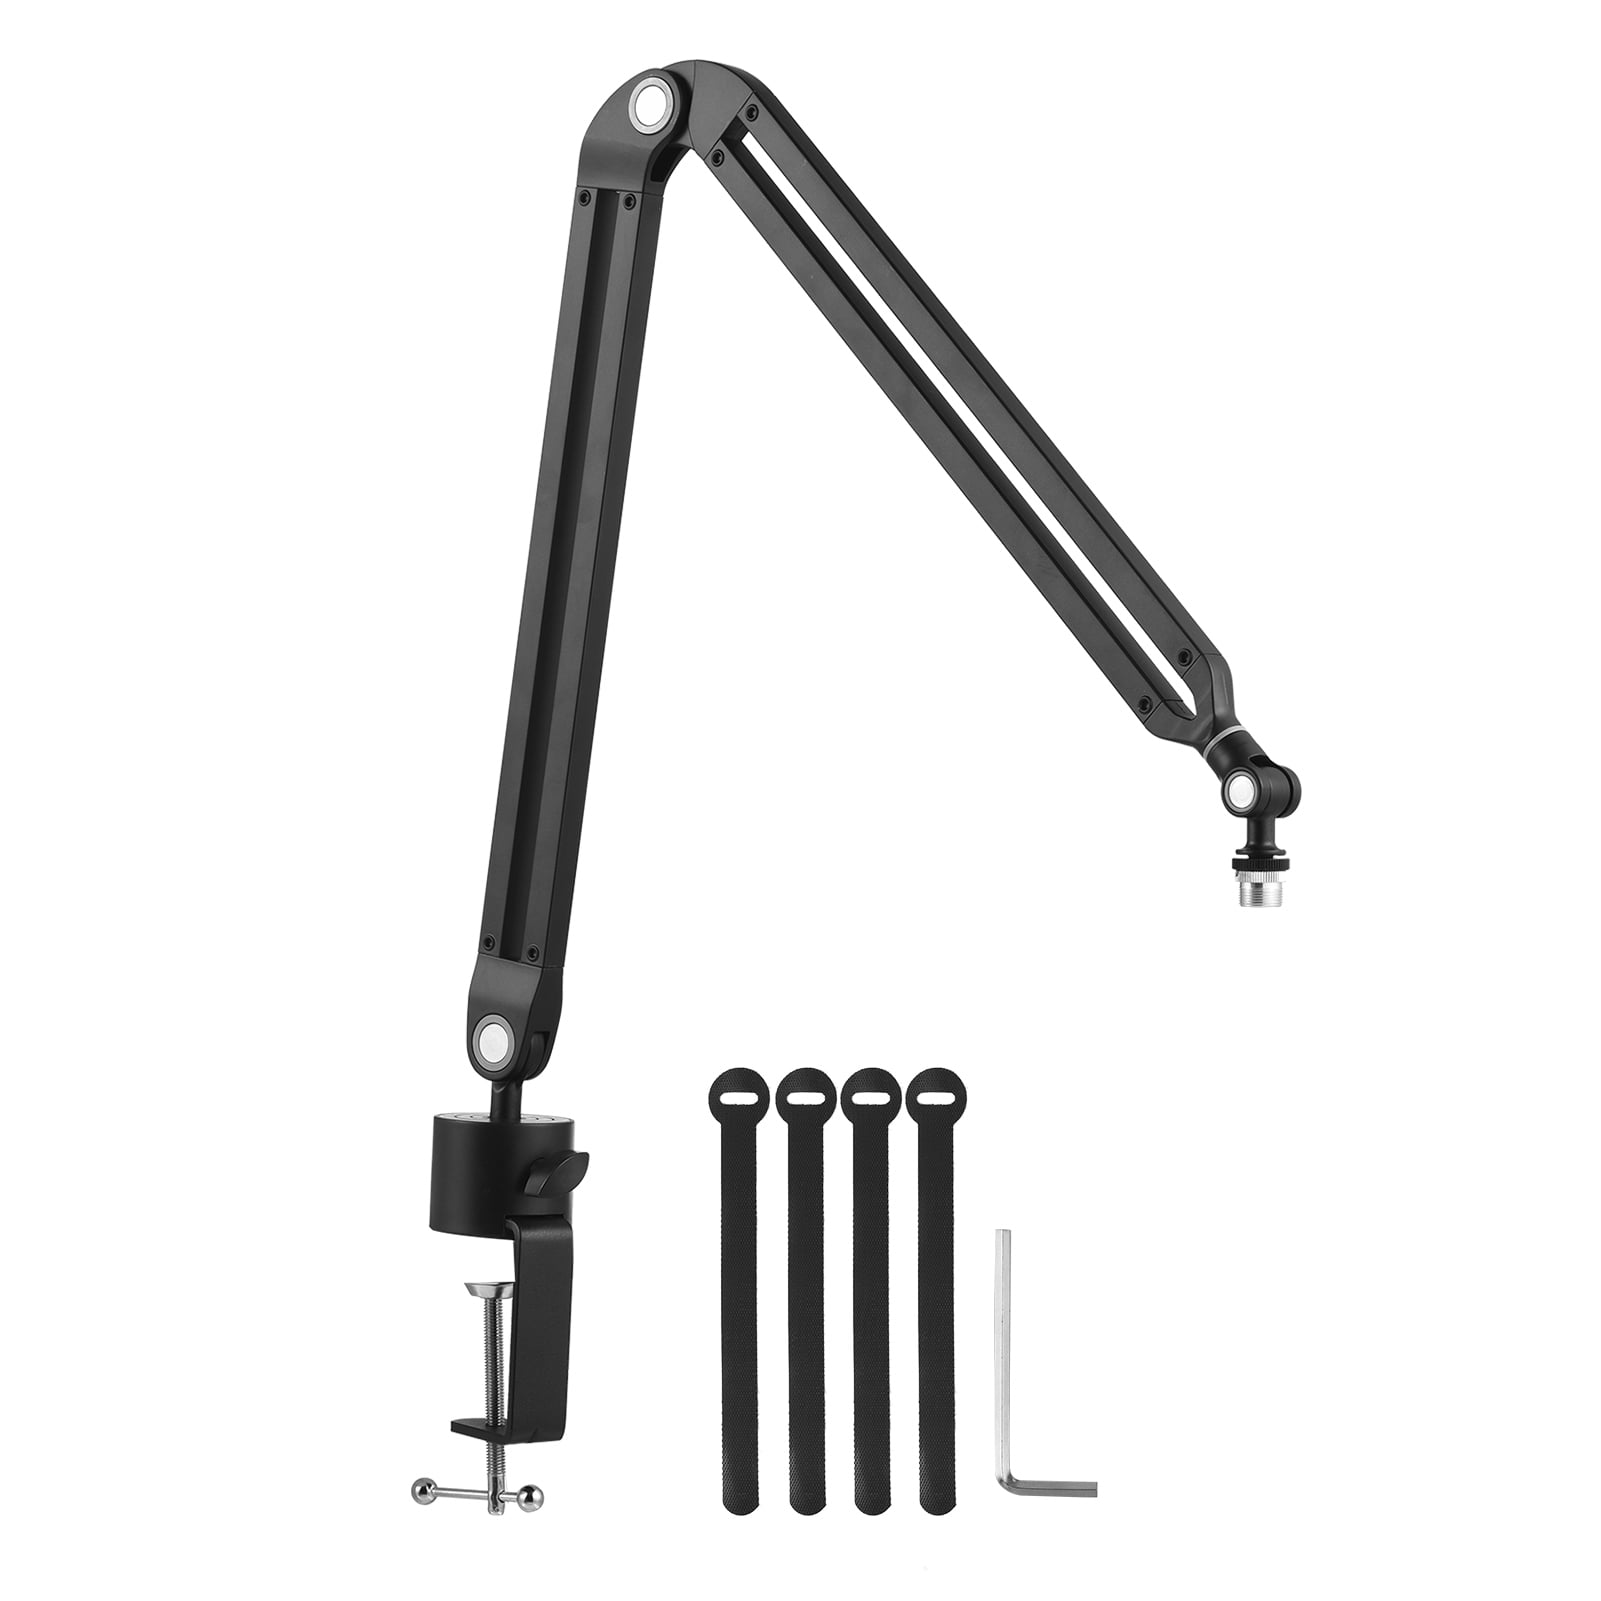 Andoer Microphone Arm Stand Set All Metal Heavy Duty Mic Suspension Arm Hands-free Flexible Mic Stand Bracket with C-Clamp Sticky Tape for Singing Live Stream